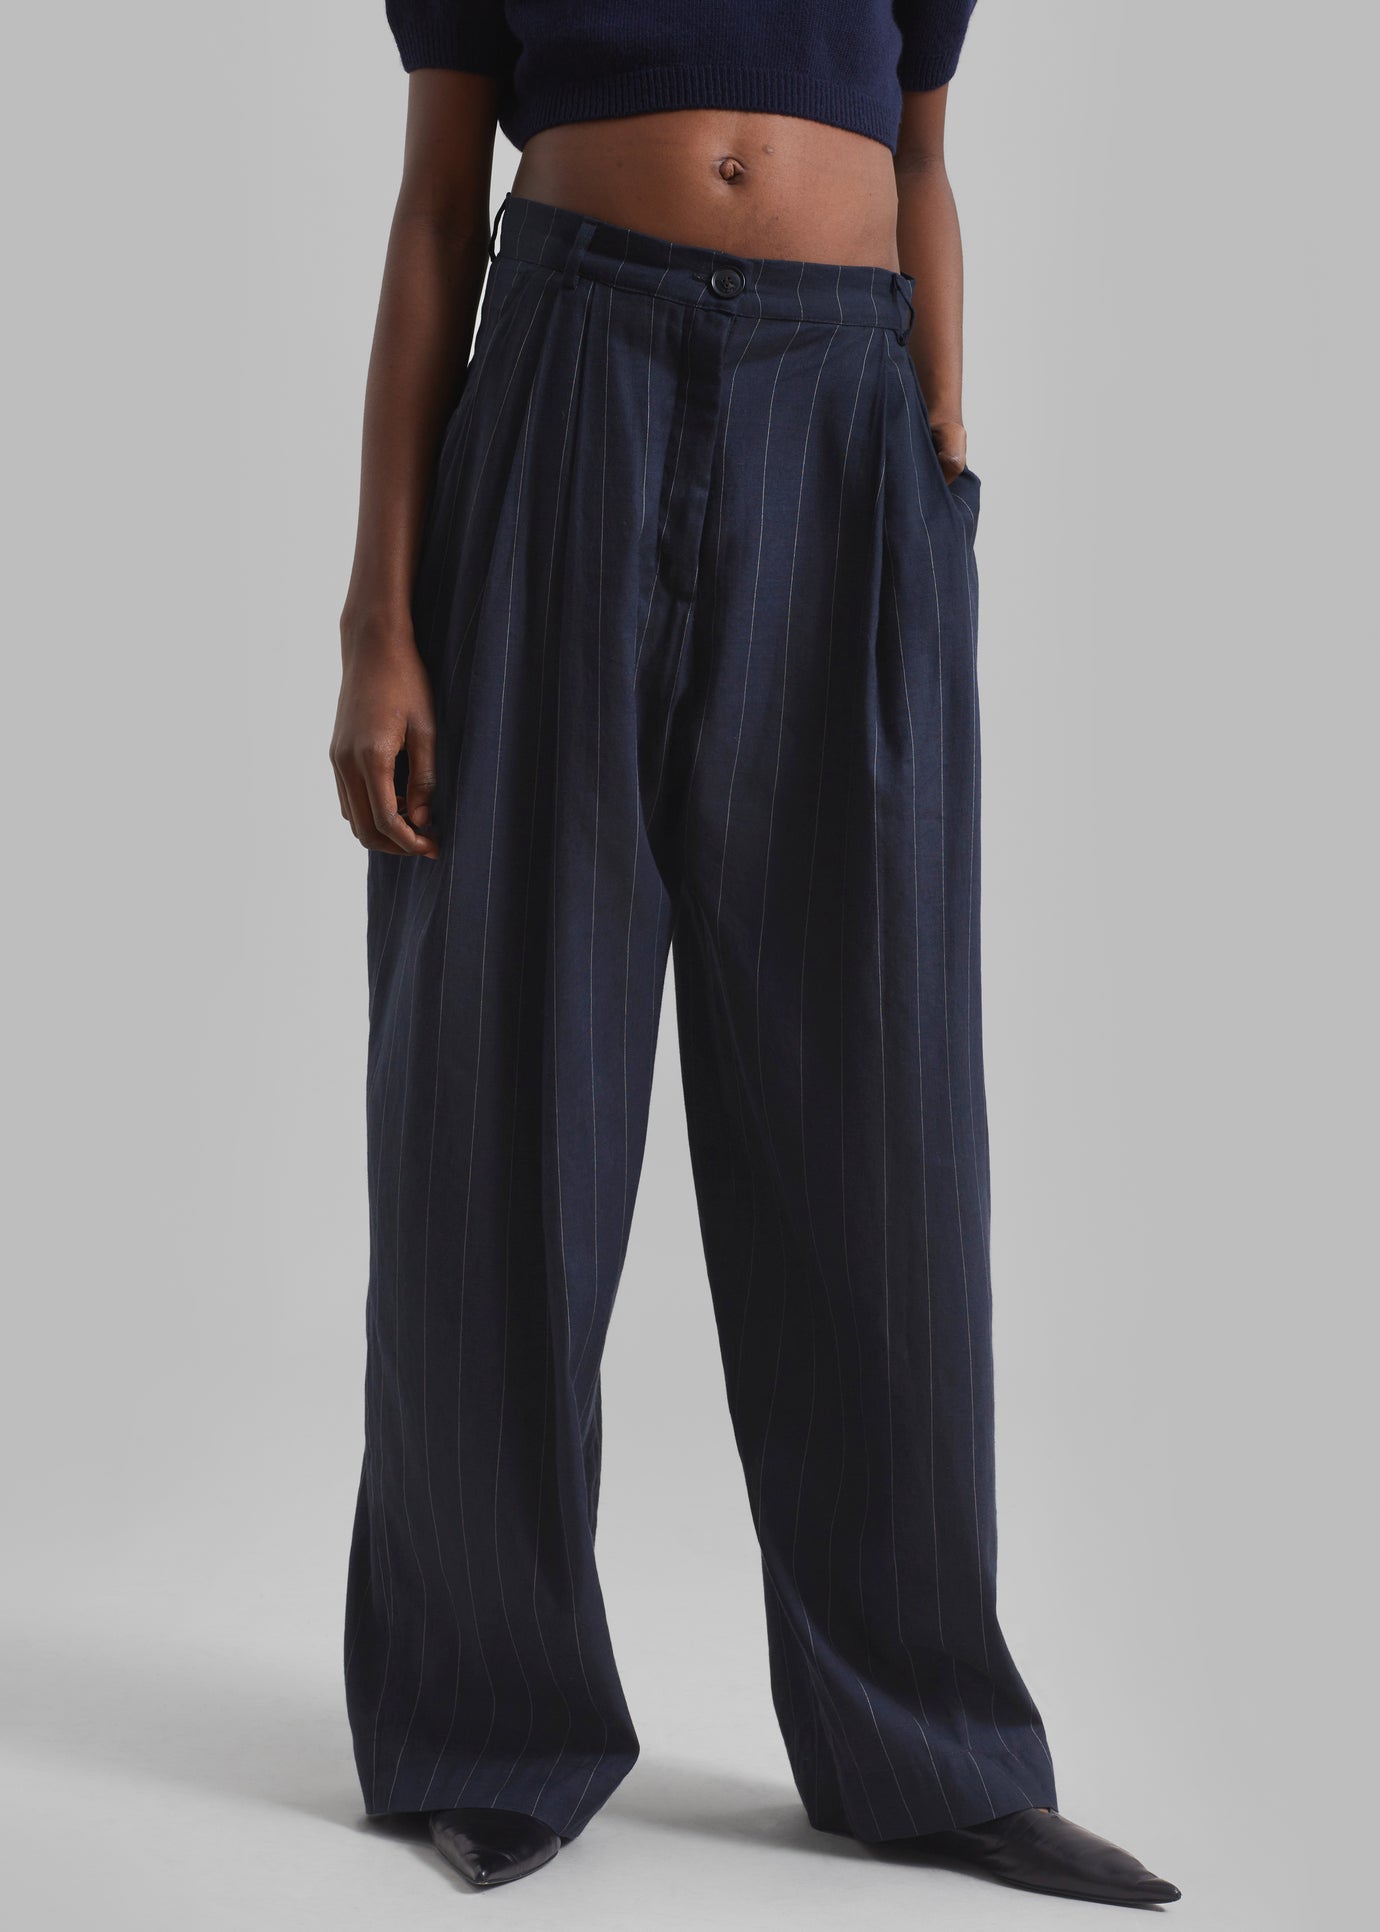 Piper Pleated Trousers - Navy/Beige Pinstripe